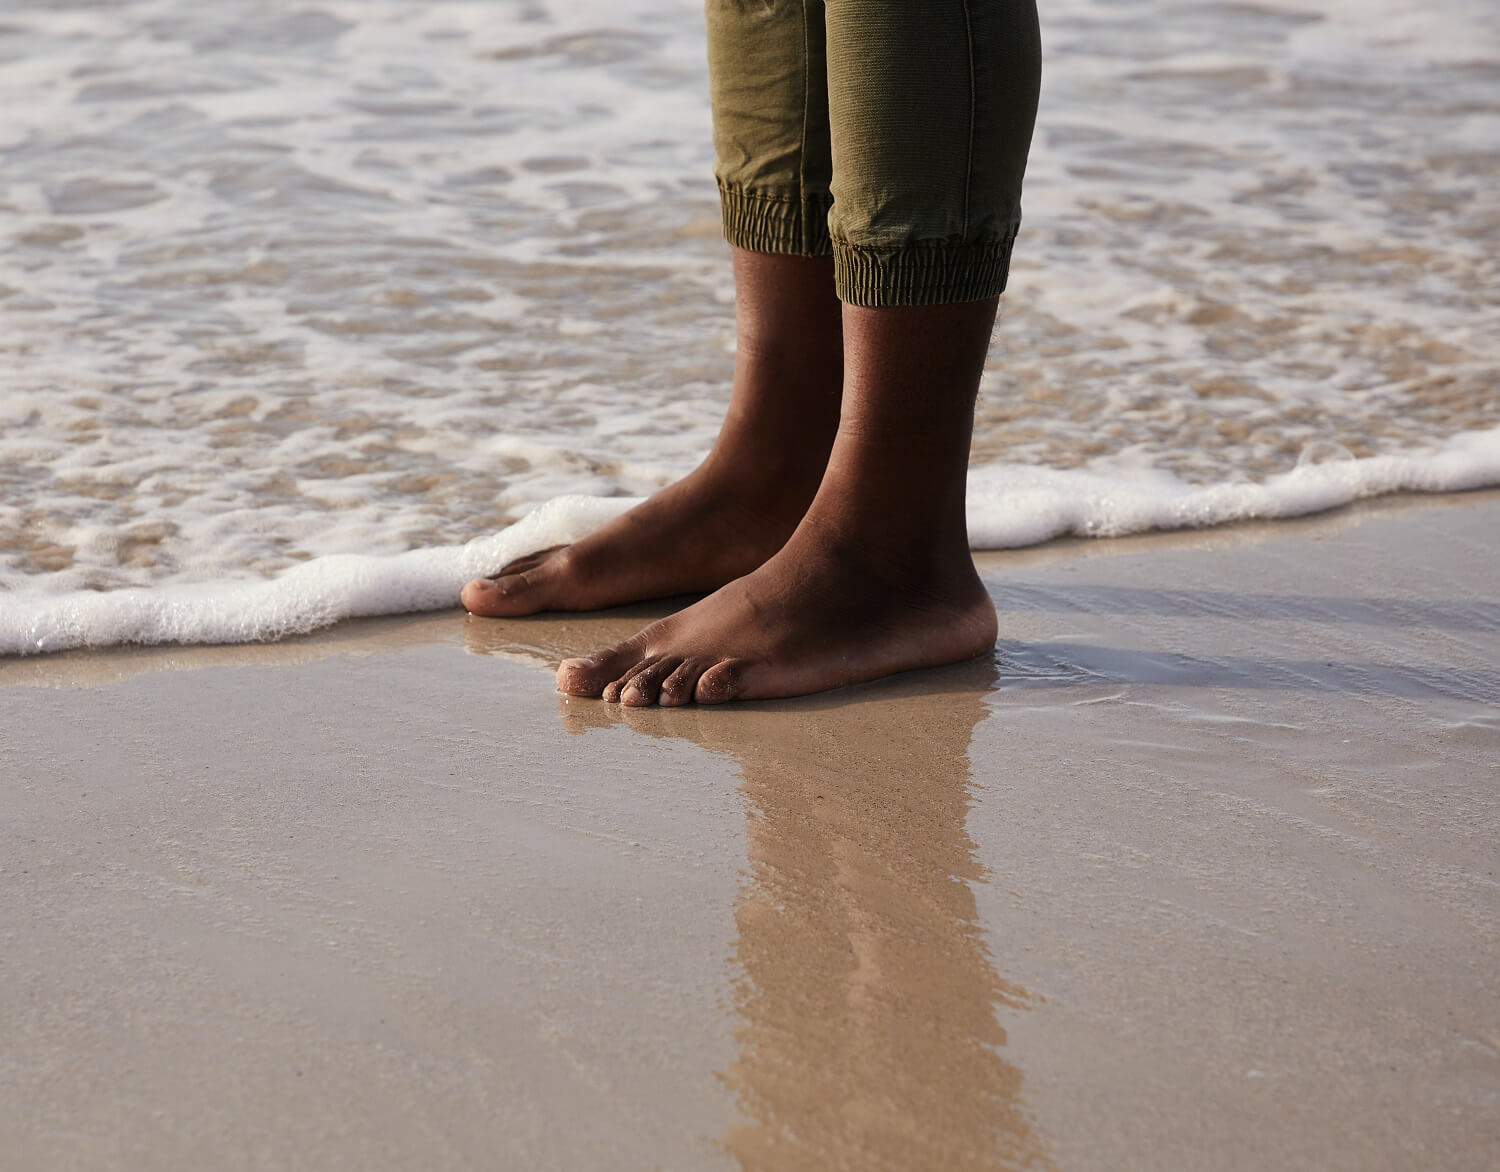 How to Take Care of Feet in Summer